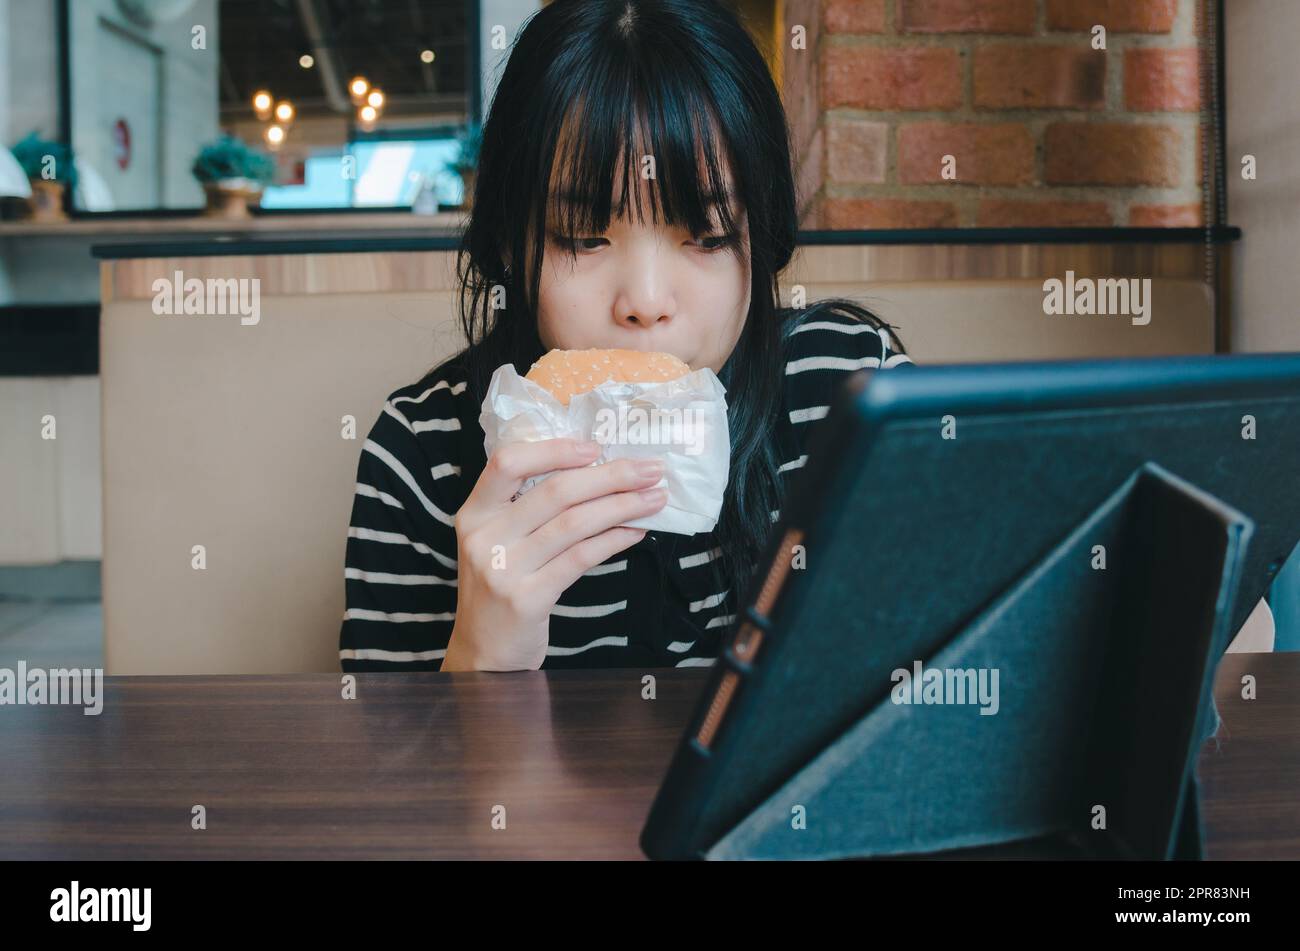 young girl is eating a hamburger and watching an online social media tech tablet on the table. Stock Photo